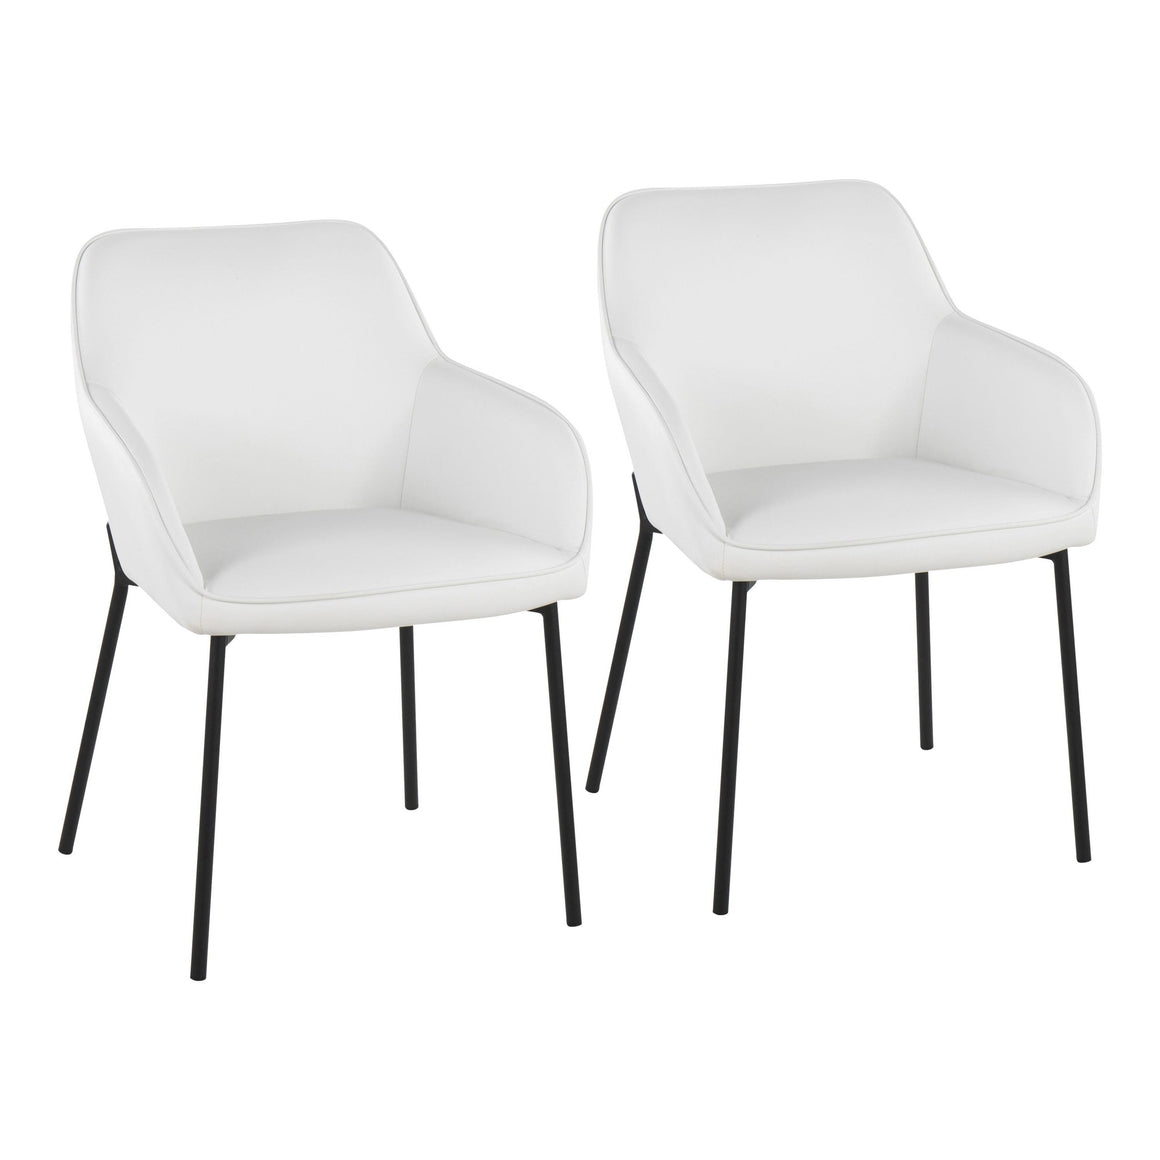 Daniella Contemporary Dining Chair in Black Steel and White Faux Leather by LumiSource - Set of 2